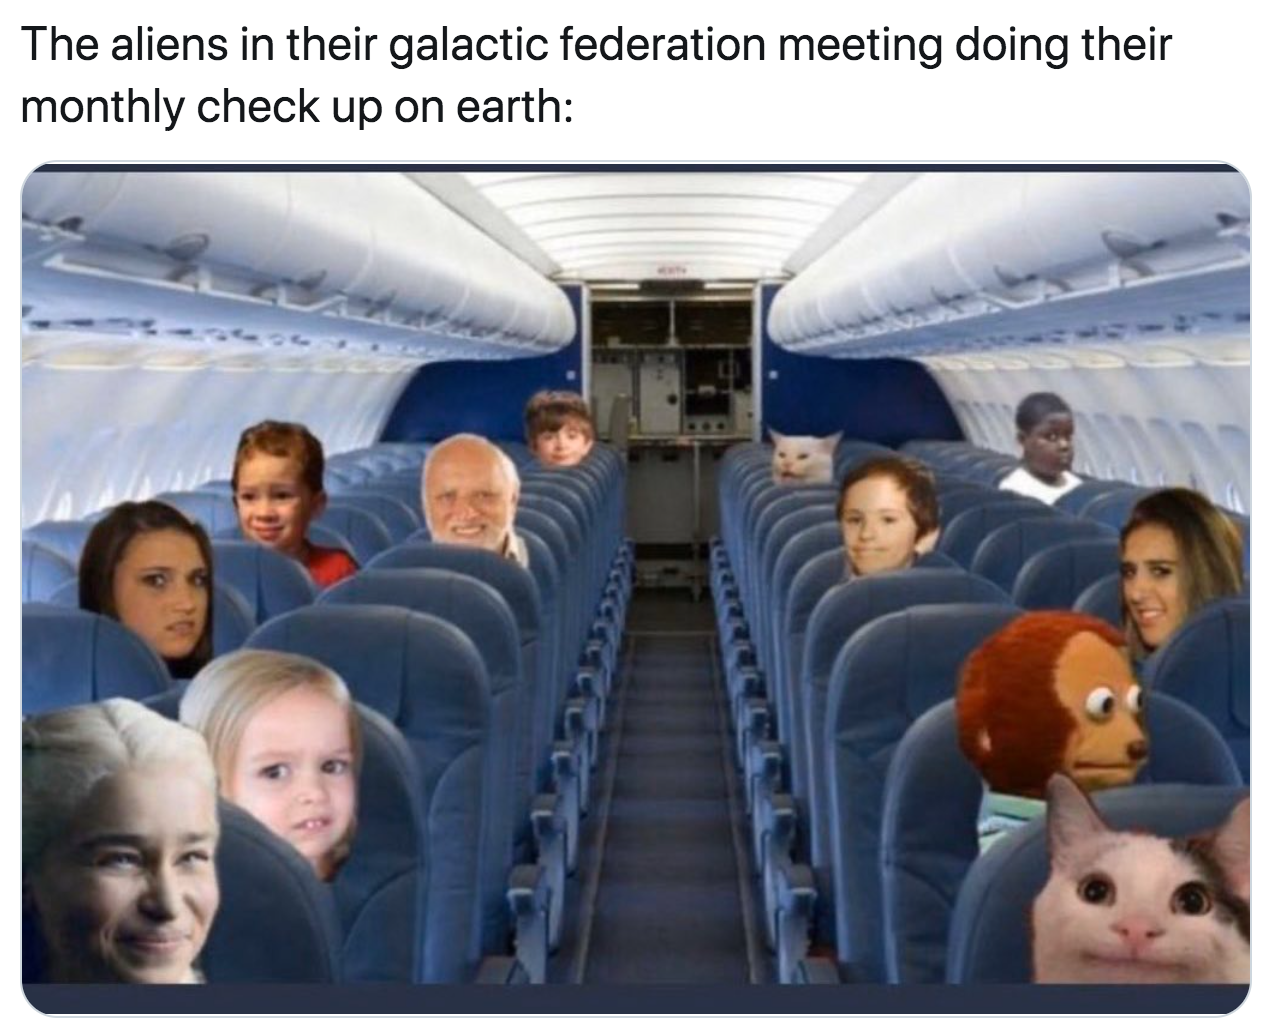 baby enters the plane - The aliens in their galactic federation meeting doing their monthly check up on earth